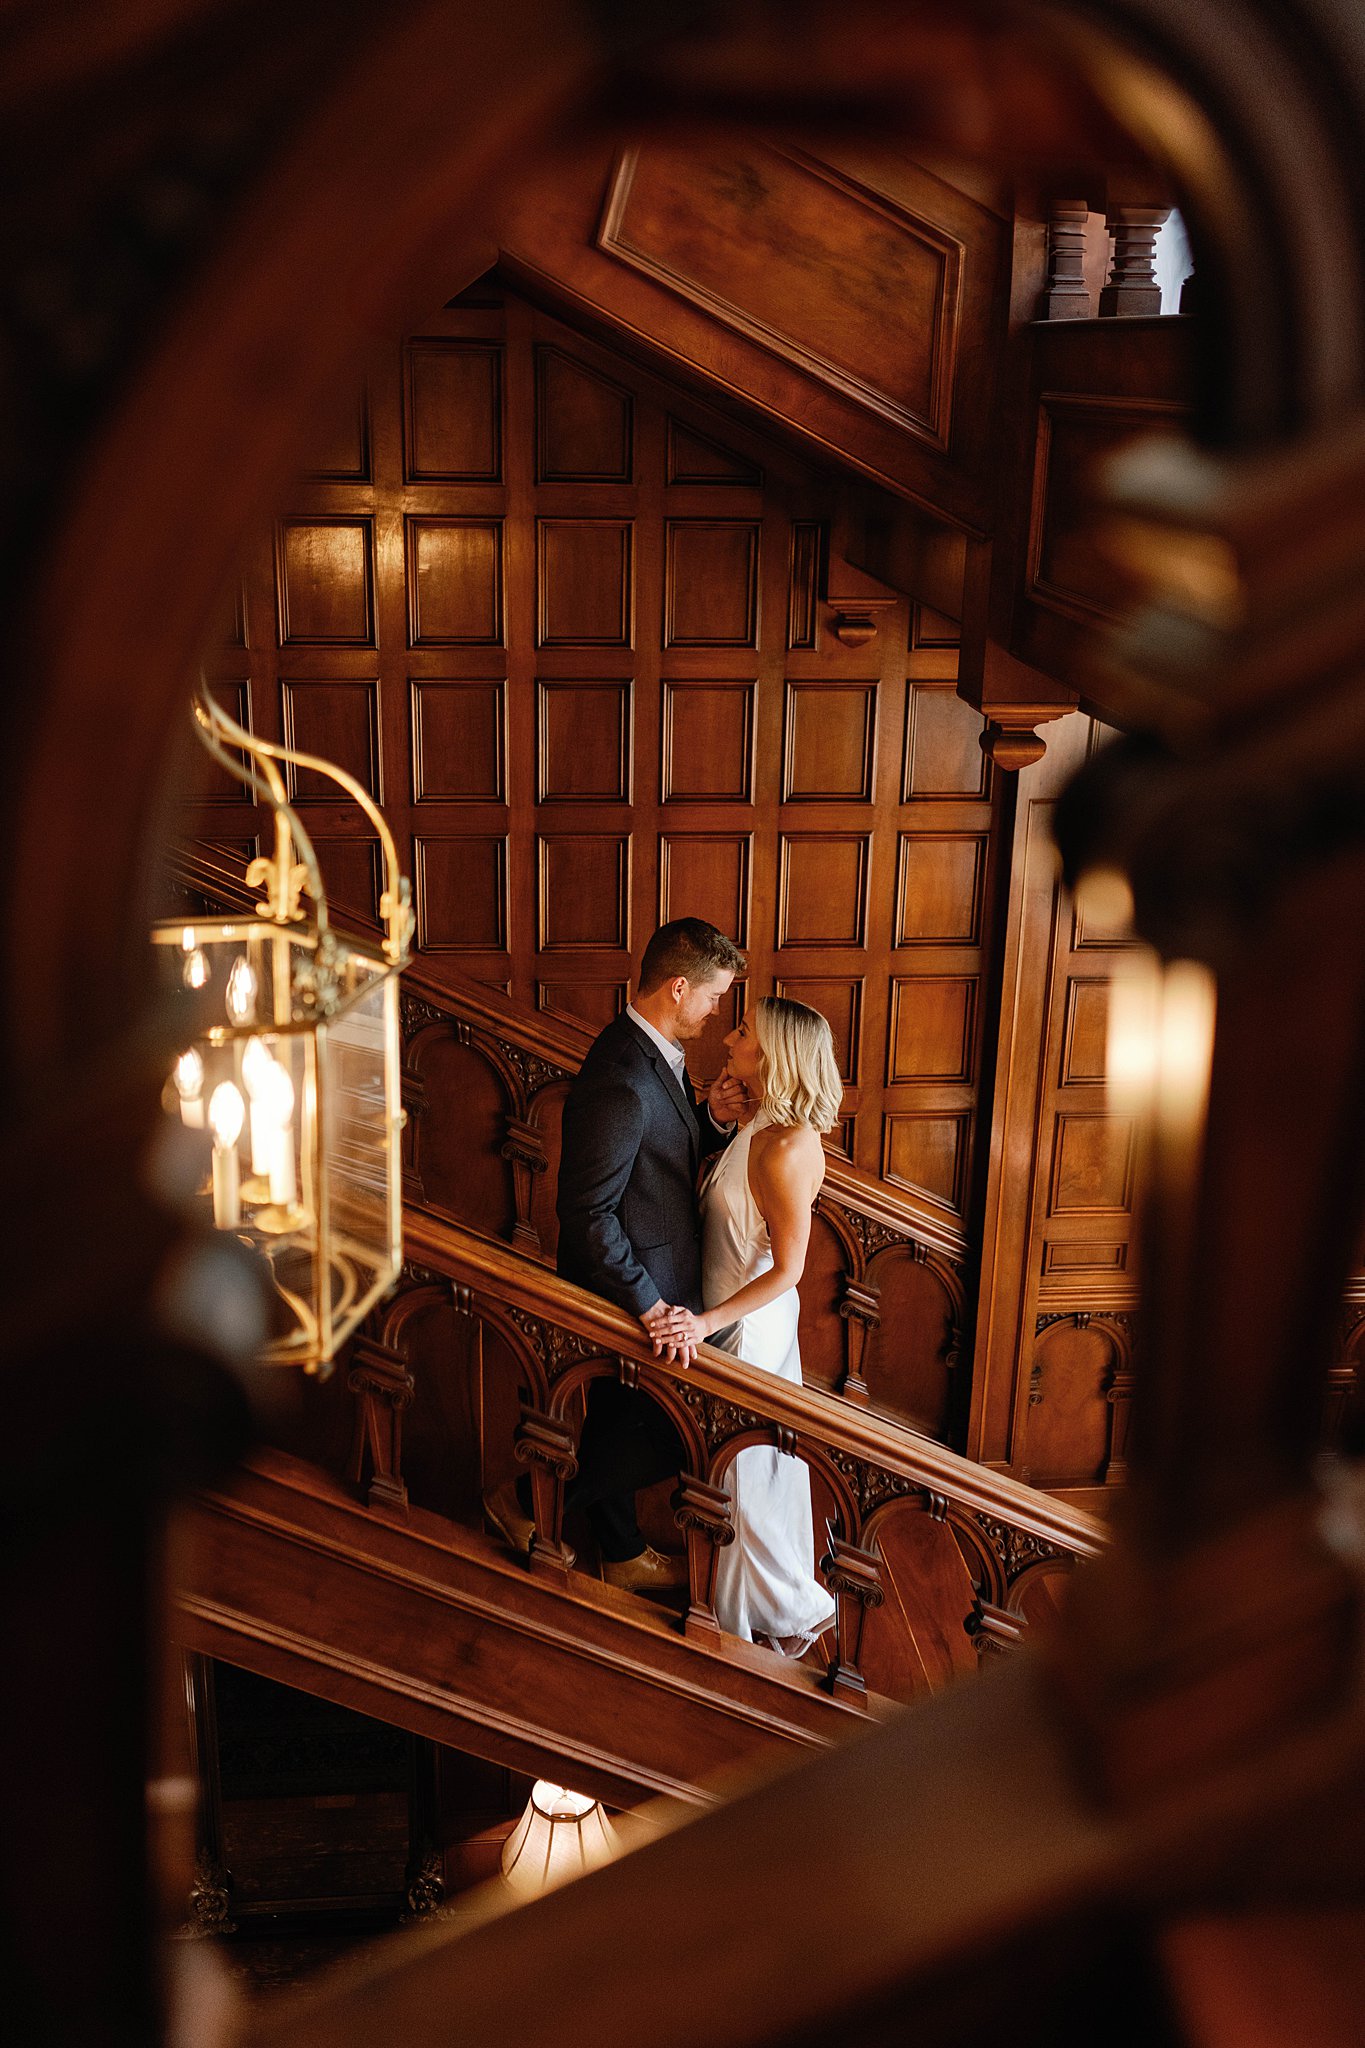 A couple steal a kiss on the staircase of Laurel Hall. He is standing on the step above her and her hand is resting on the wooden hand railing.